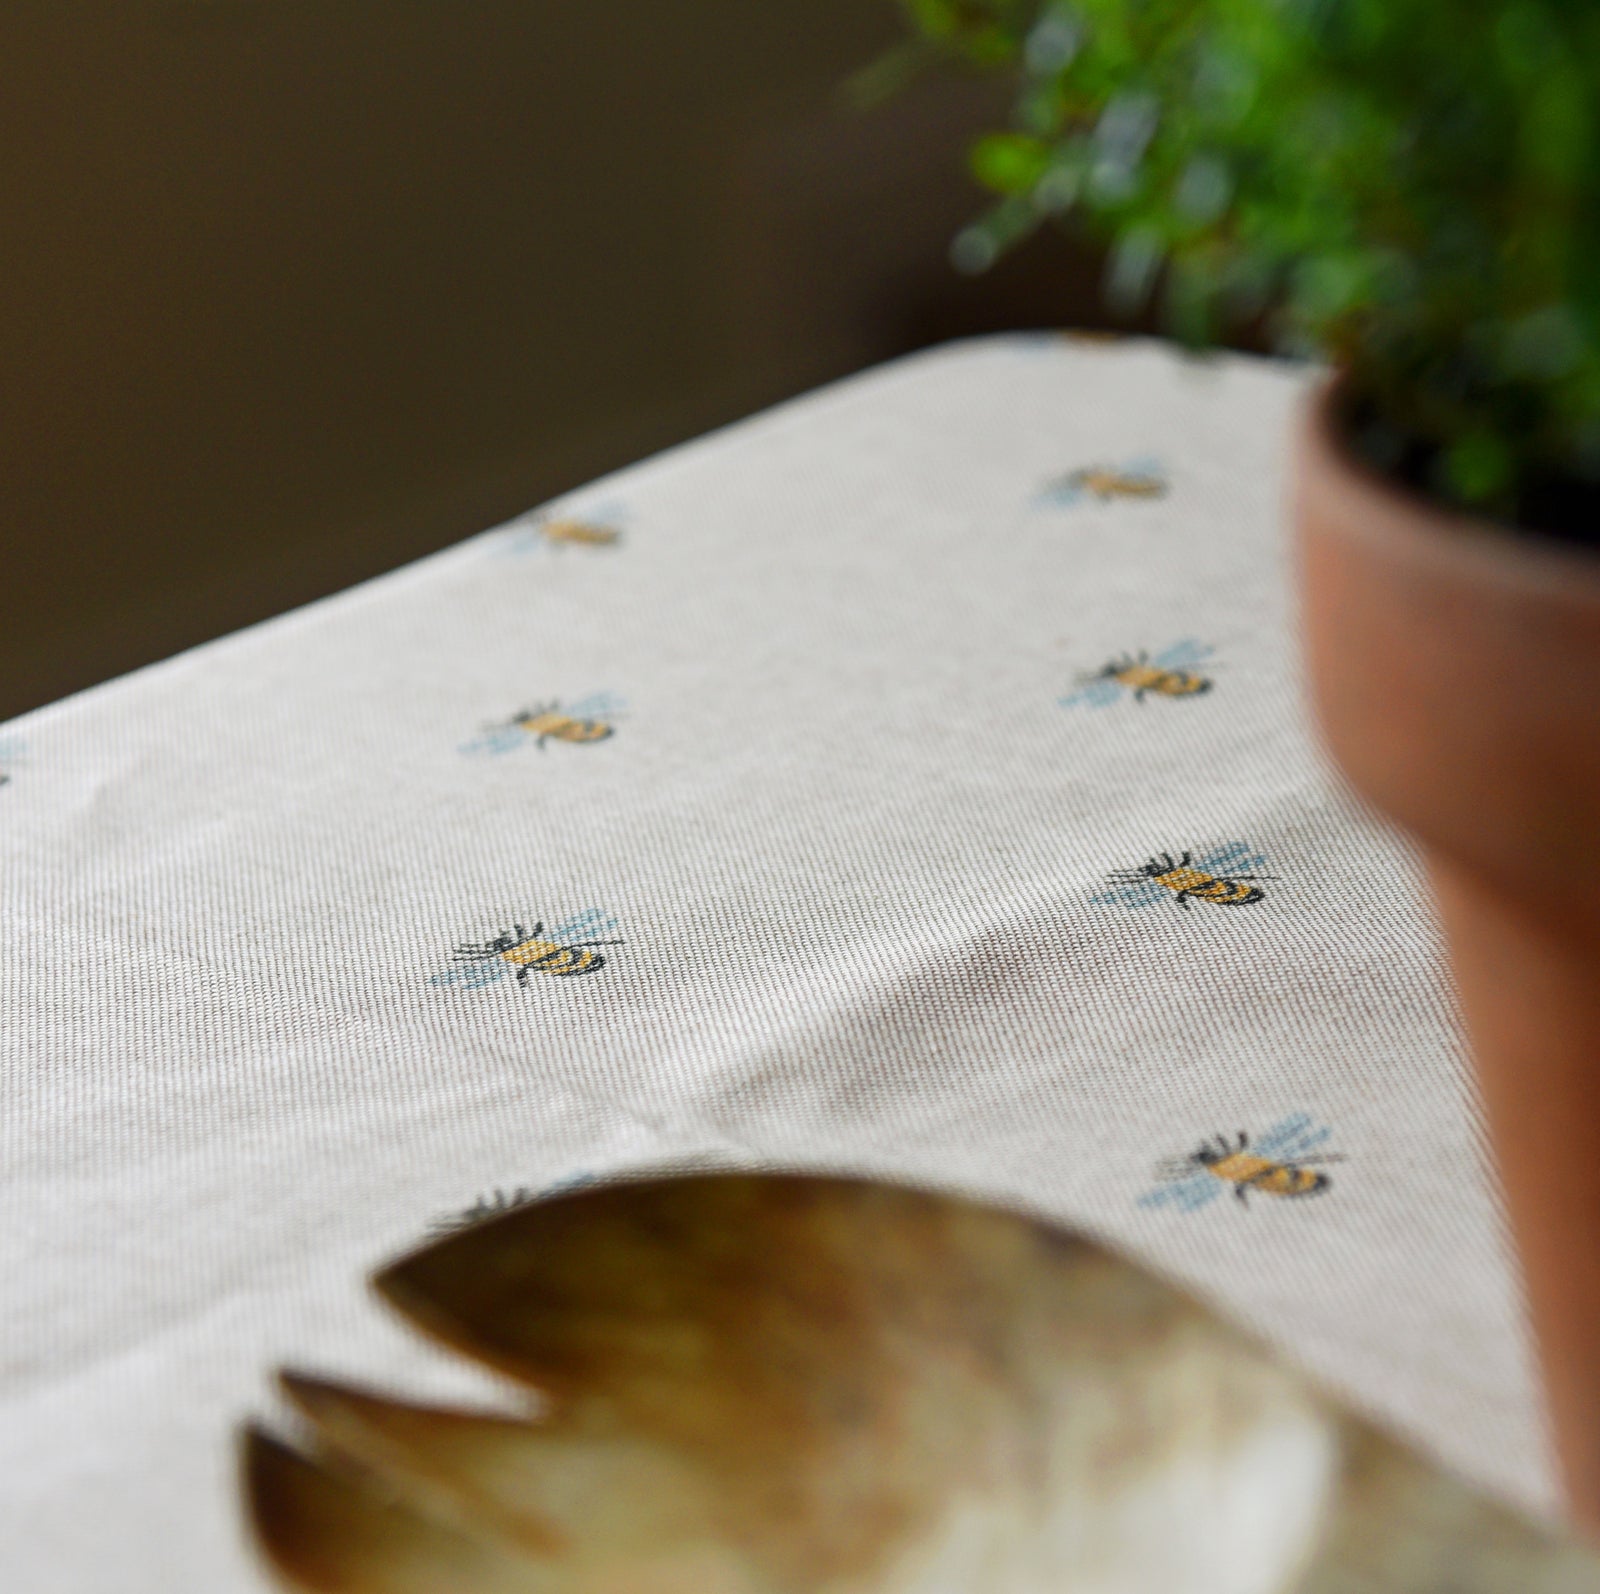 Bumblebee oilcloth tablecloth on a kitchen table